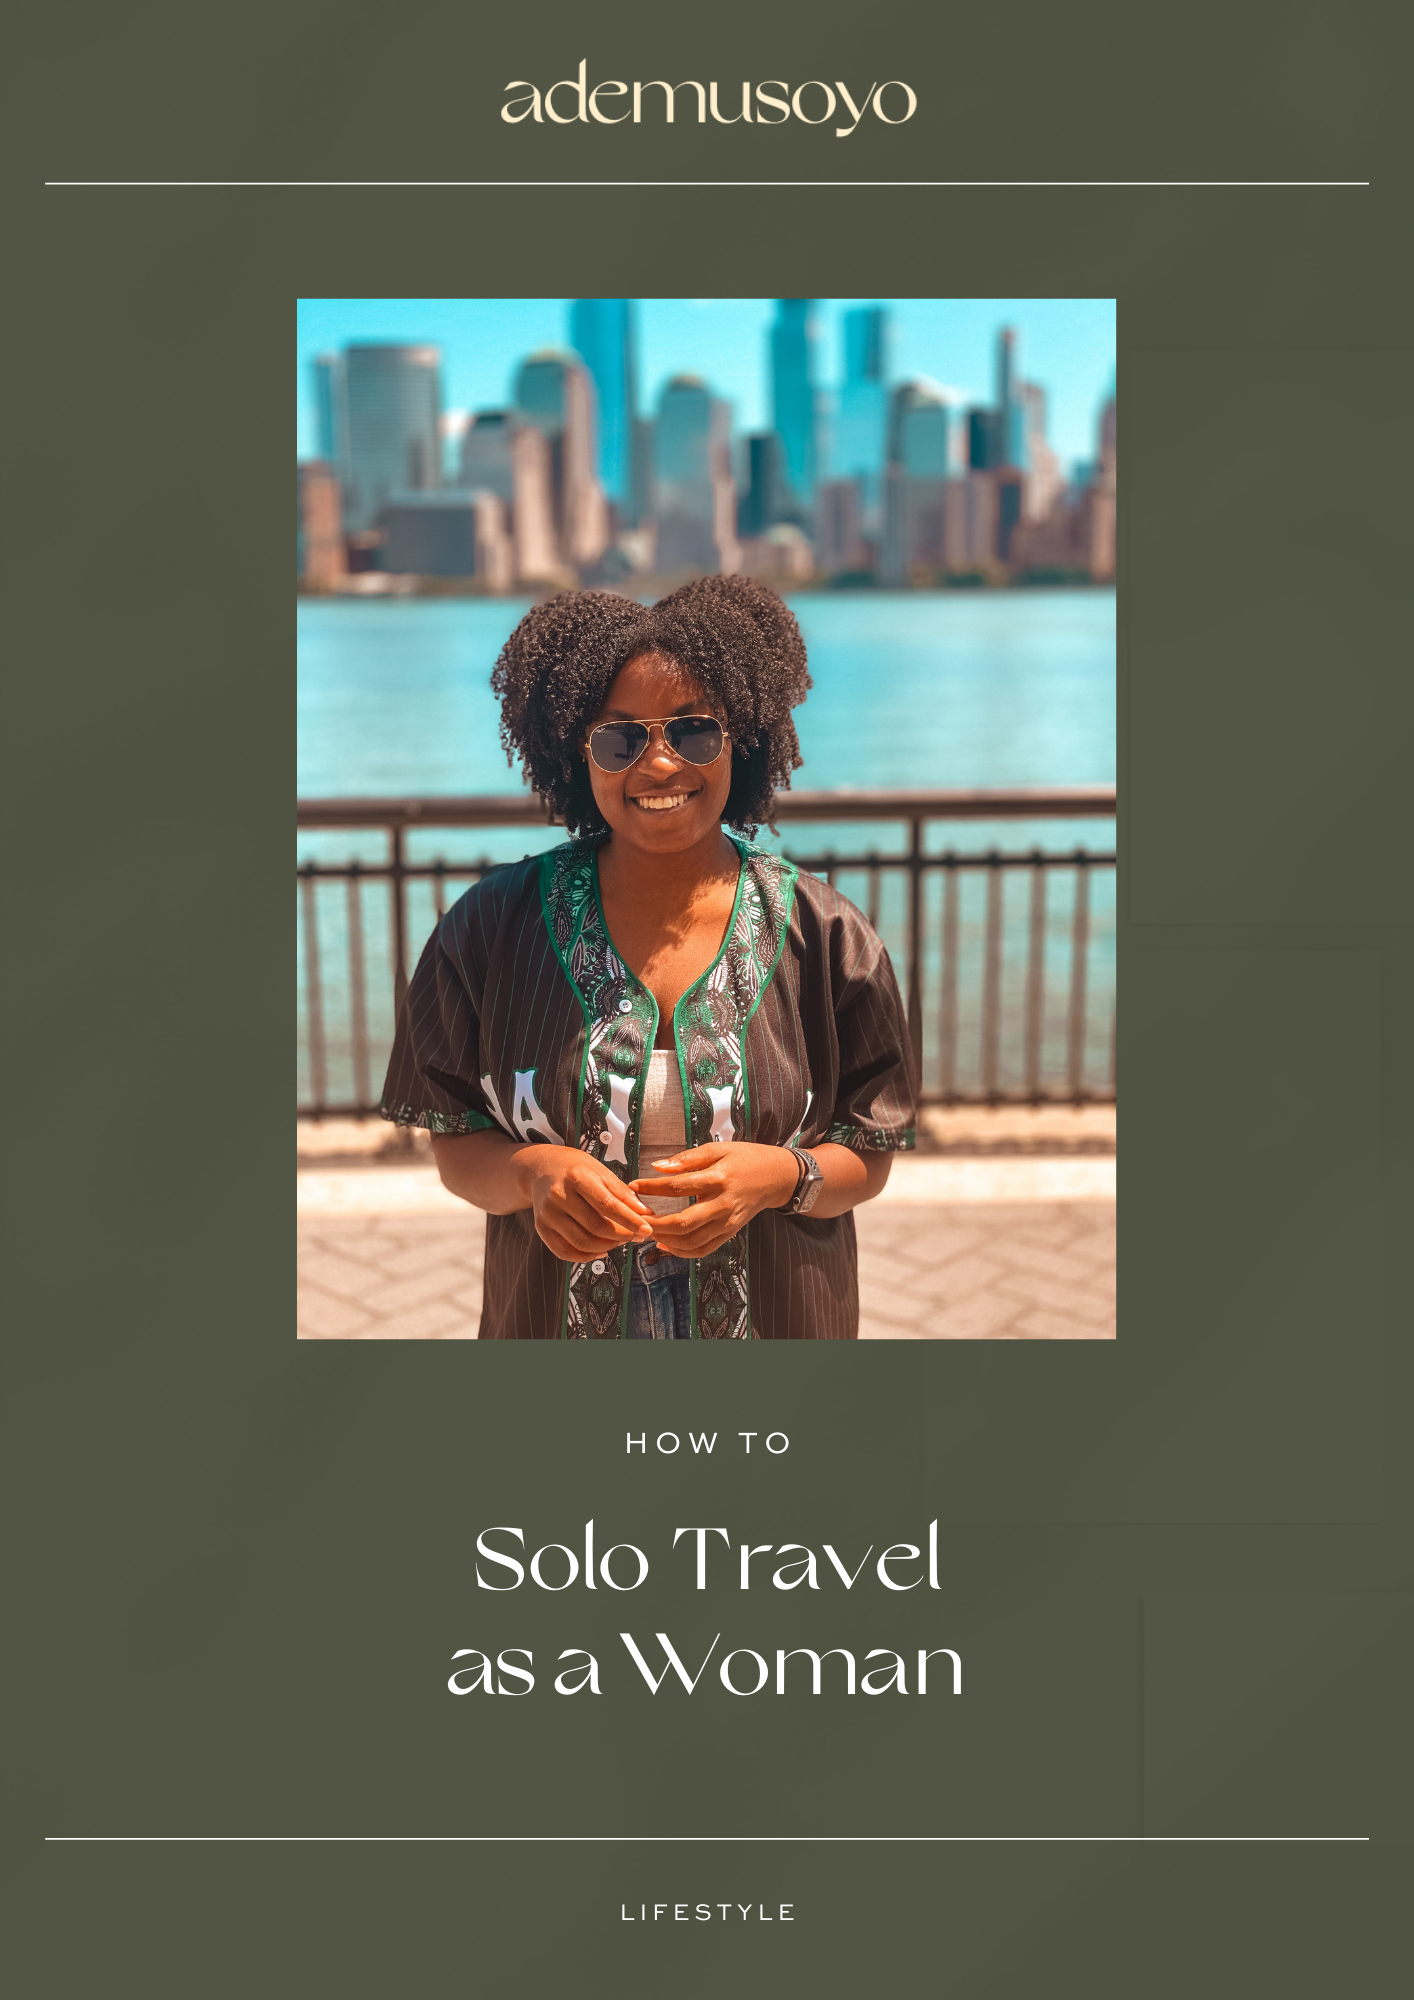 How To Solo Travel as a Woman